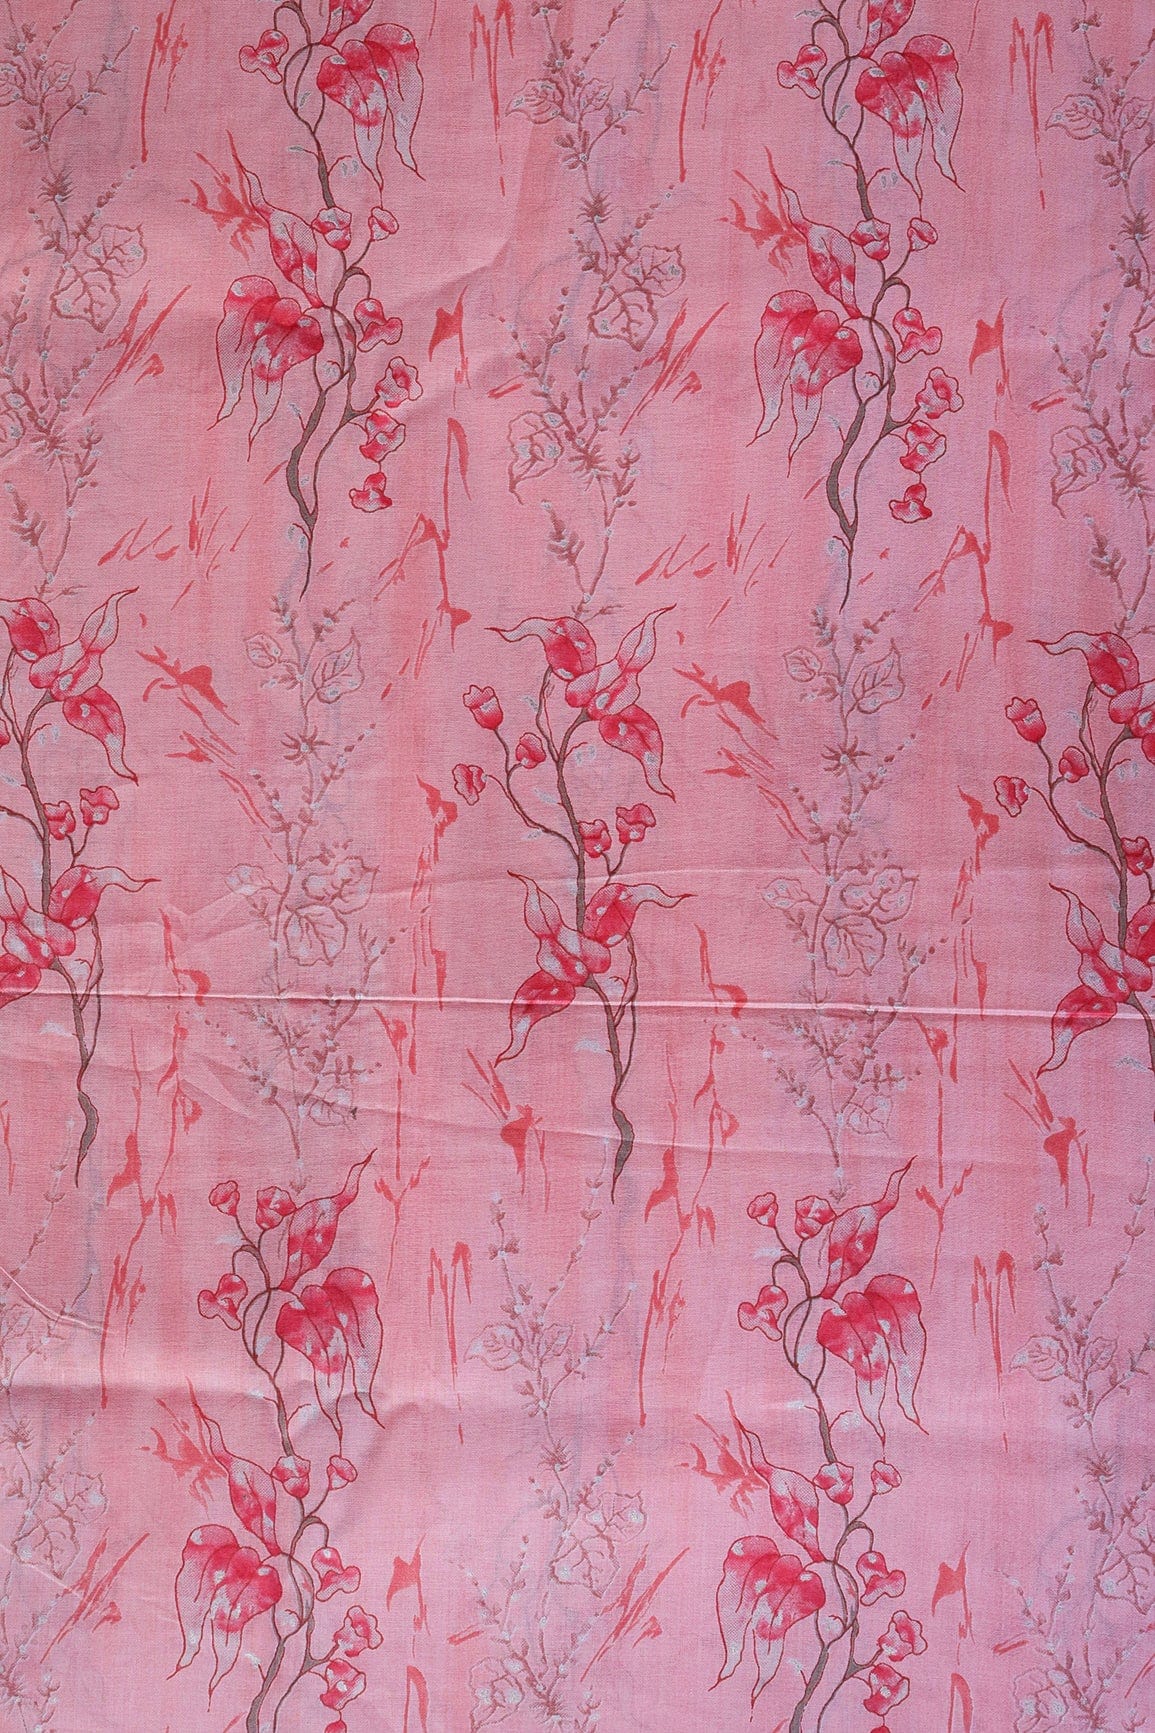 doeraa Prints Pastel Pink And Brown Foil Floral Print On Pure Mul Cotton Fabric